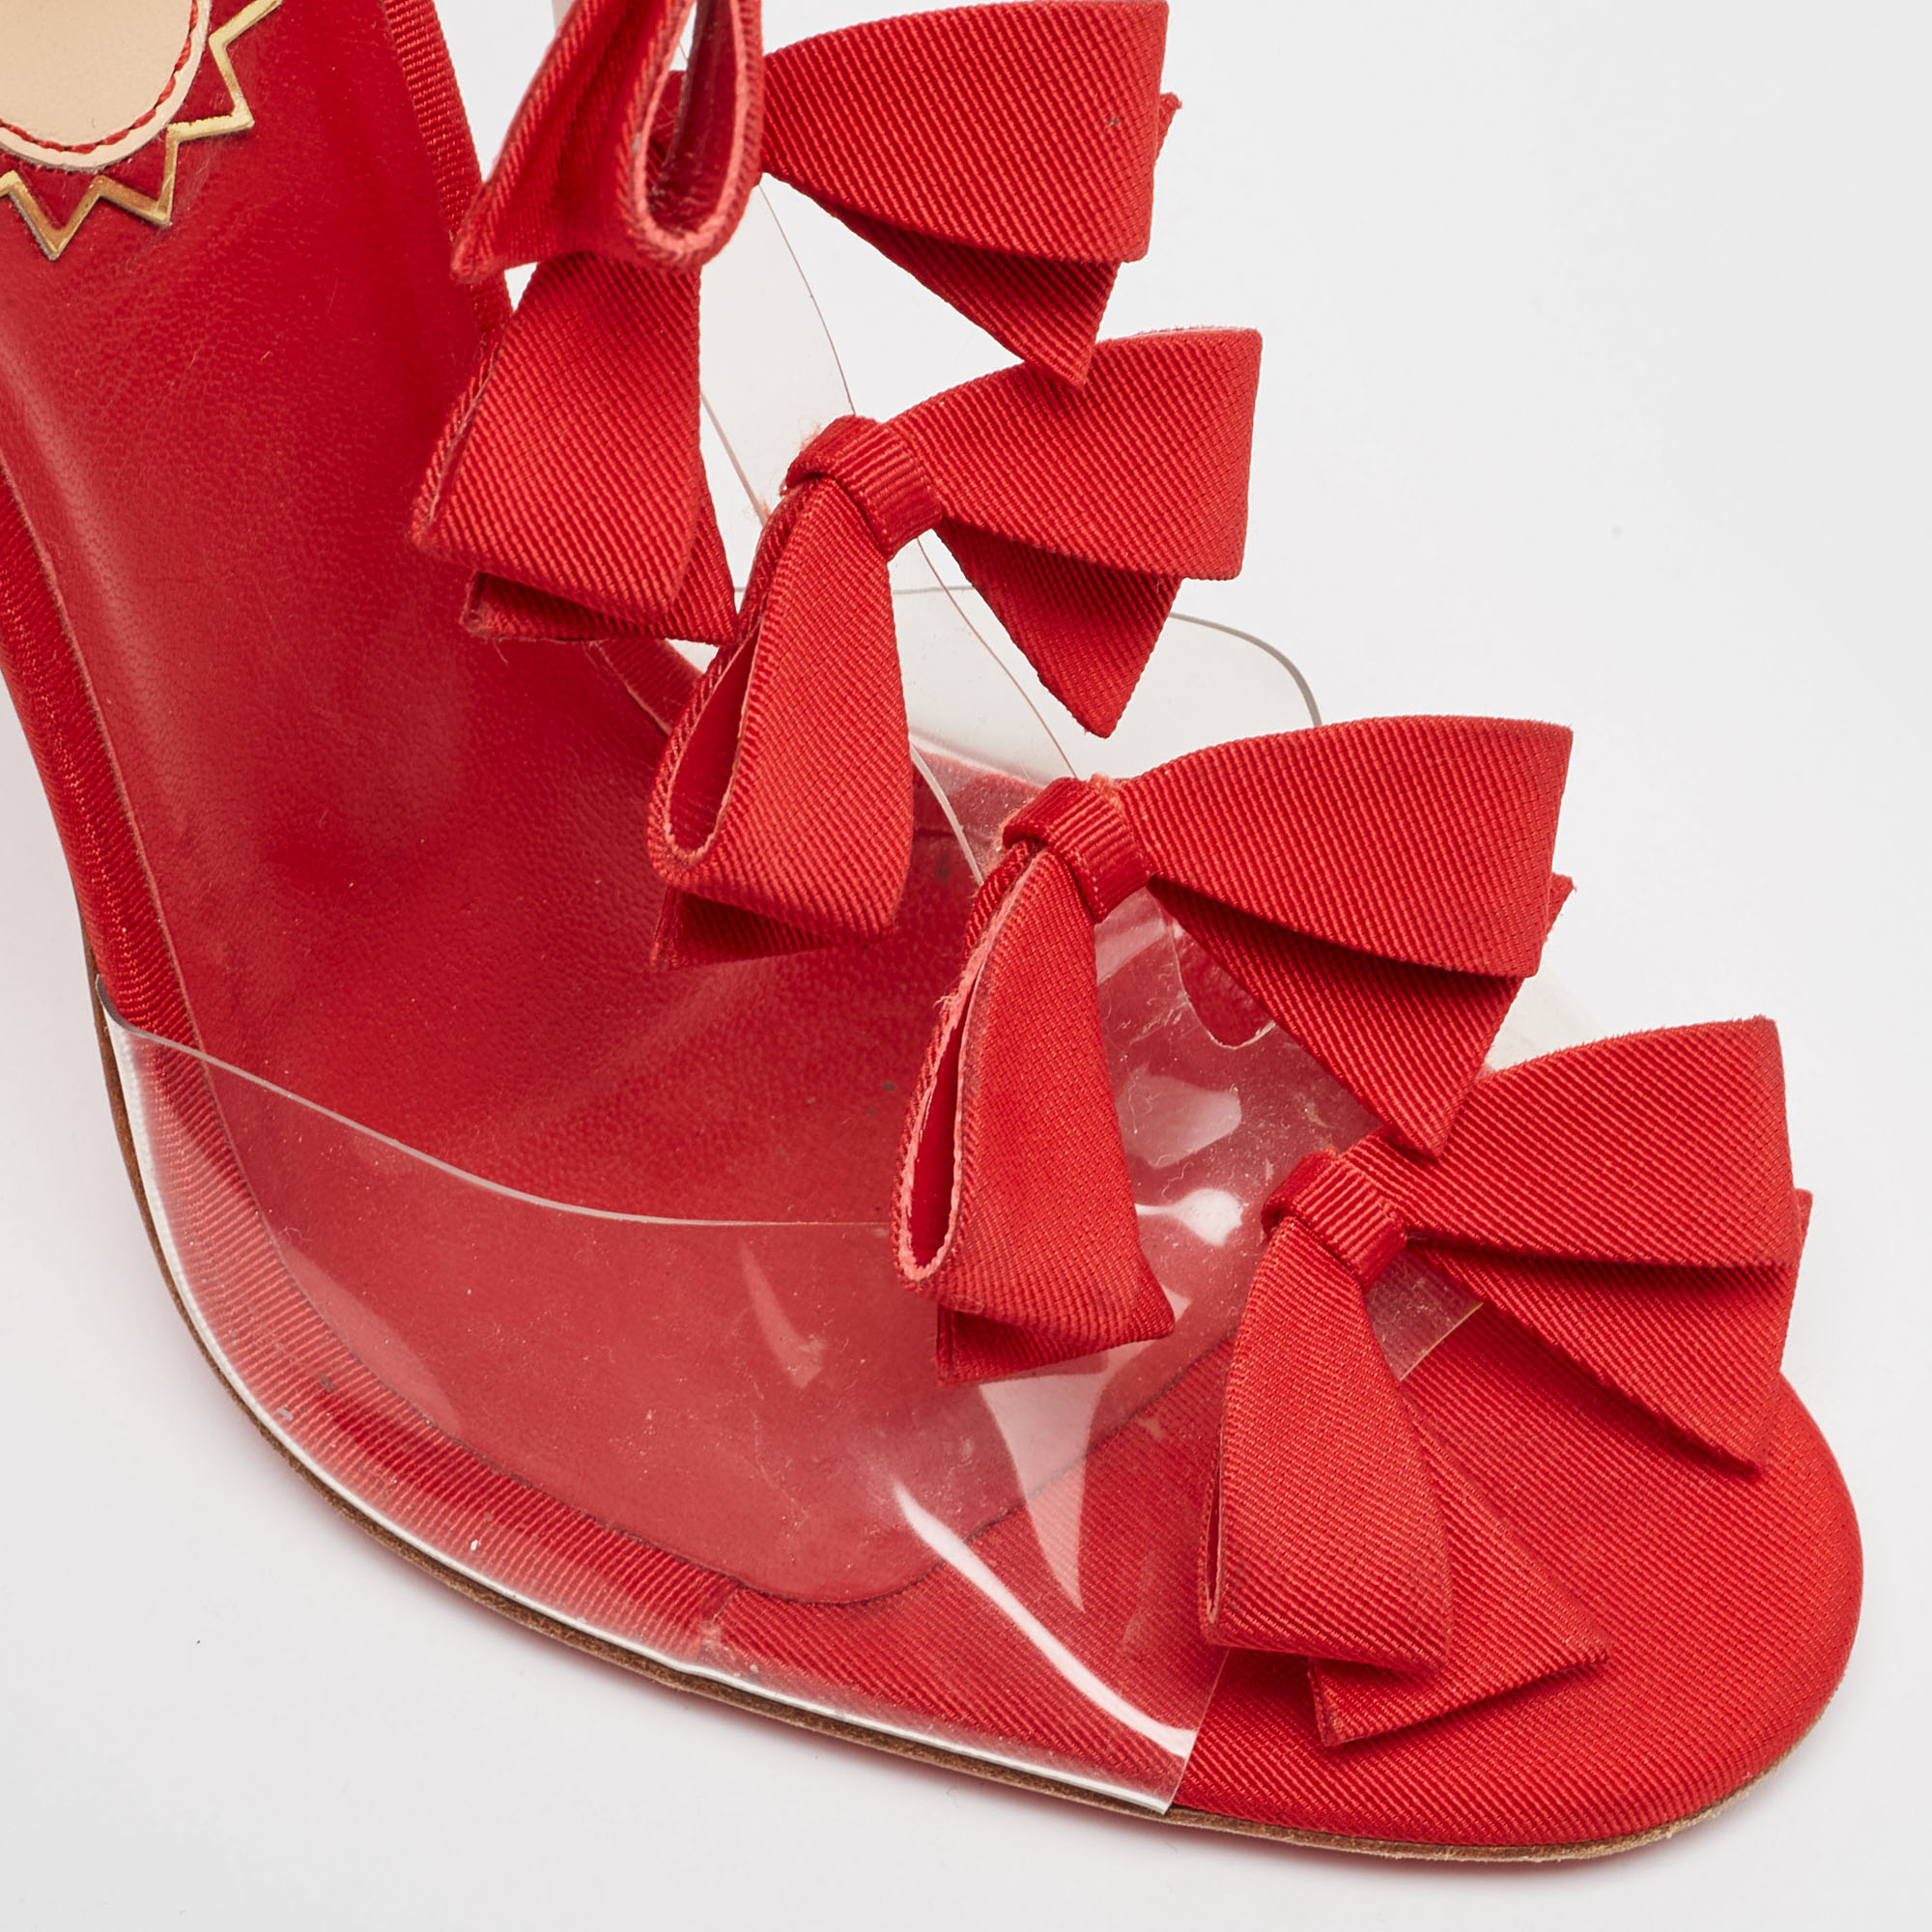 Christian Louboutin Red/Transparent Fabric And PVC Bow Bow Ankle Strap Sandals Size 39